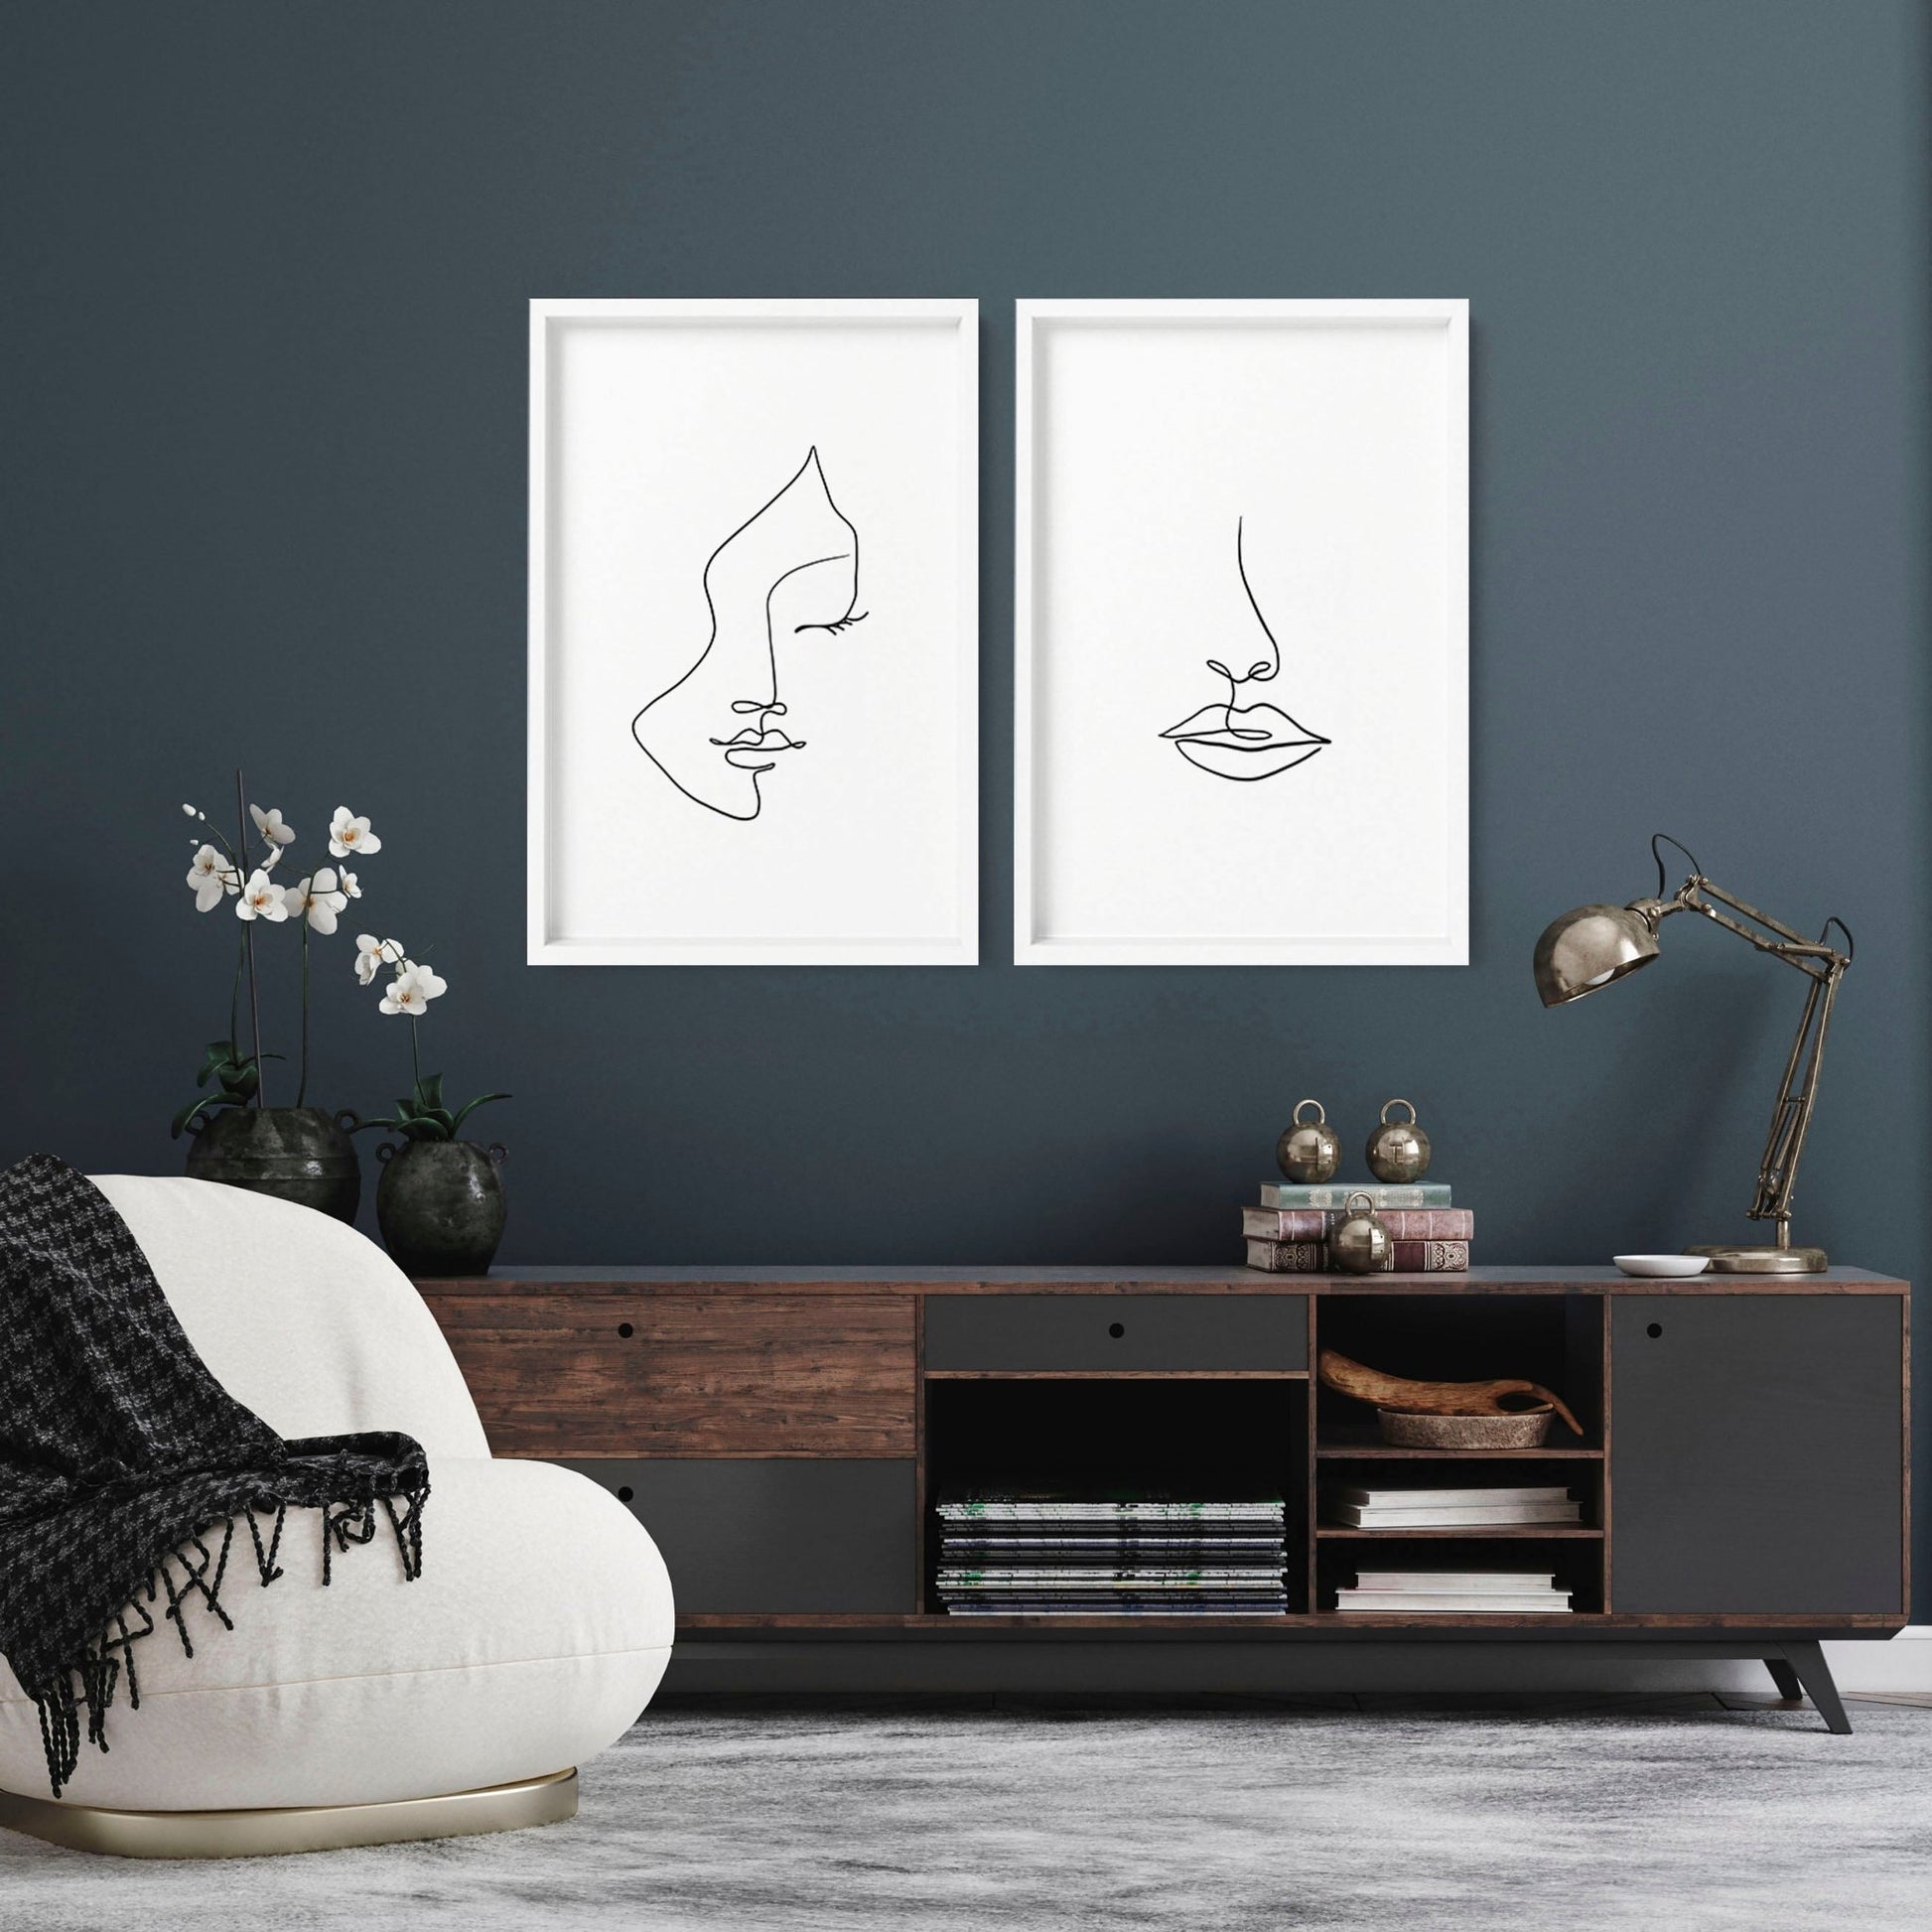 Faces Line art drawings for living room | Set of 2 wall art prints